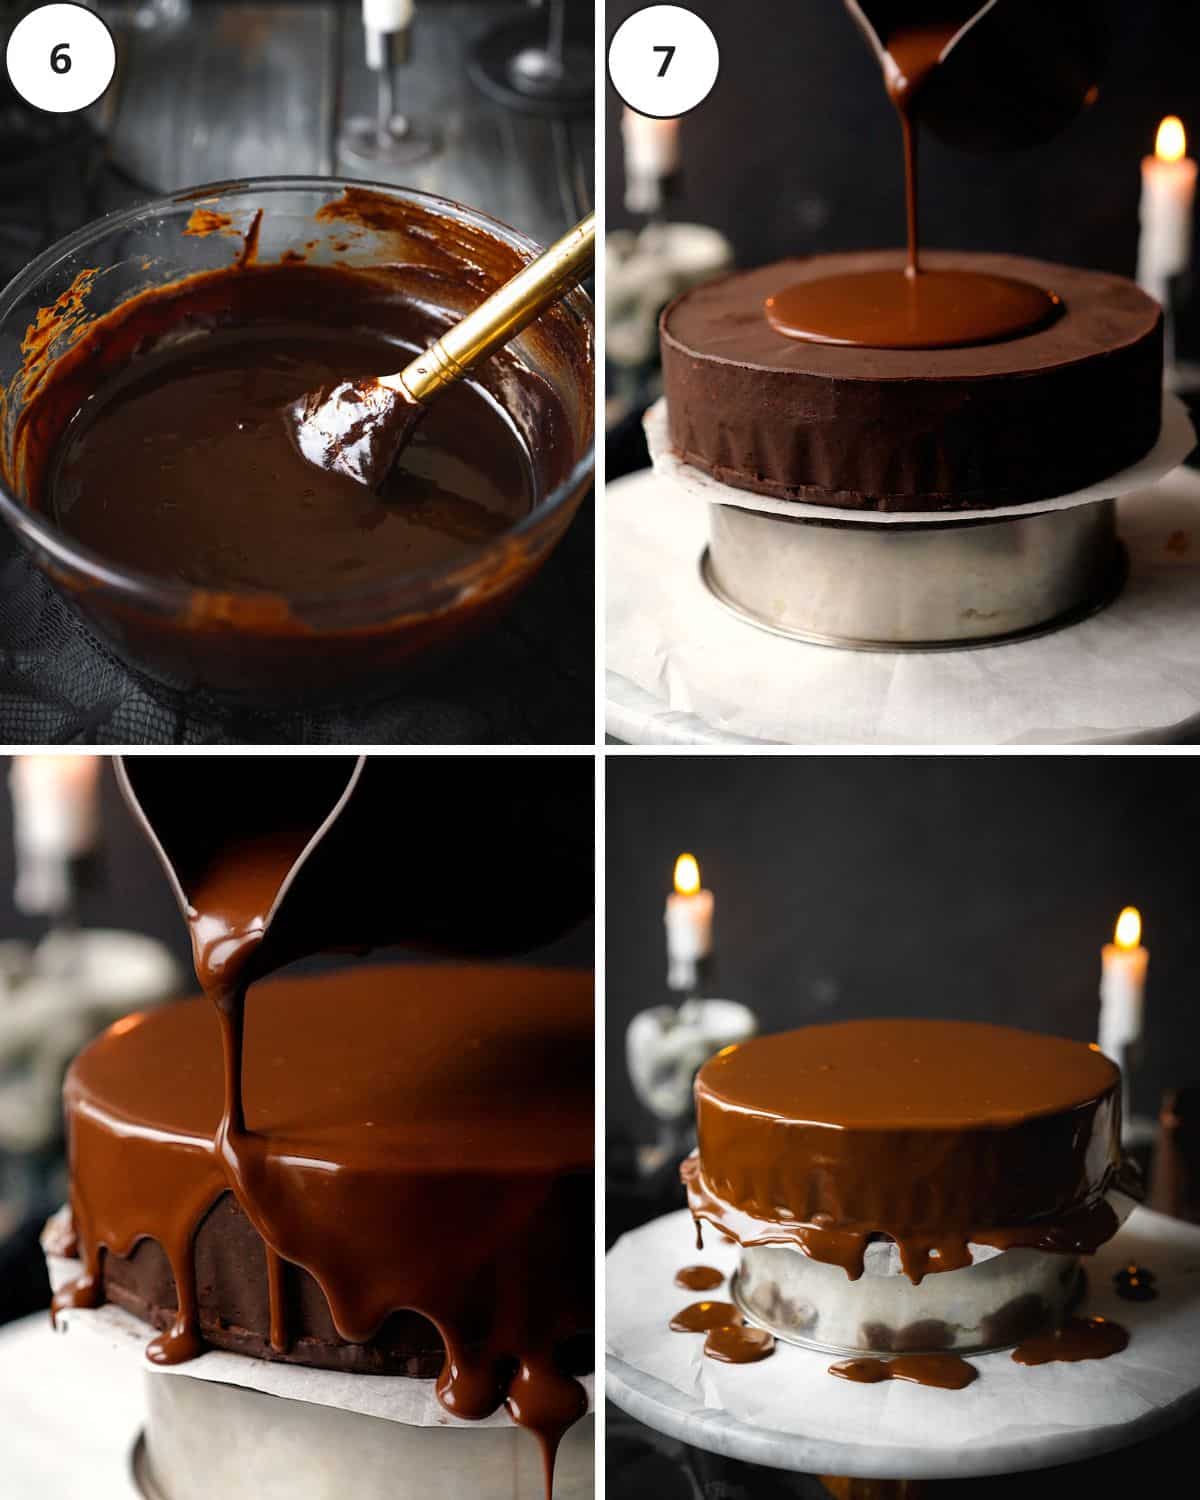 pouring chocolate glaze over a biscuit cake.